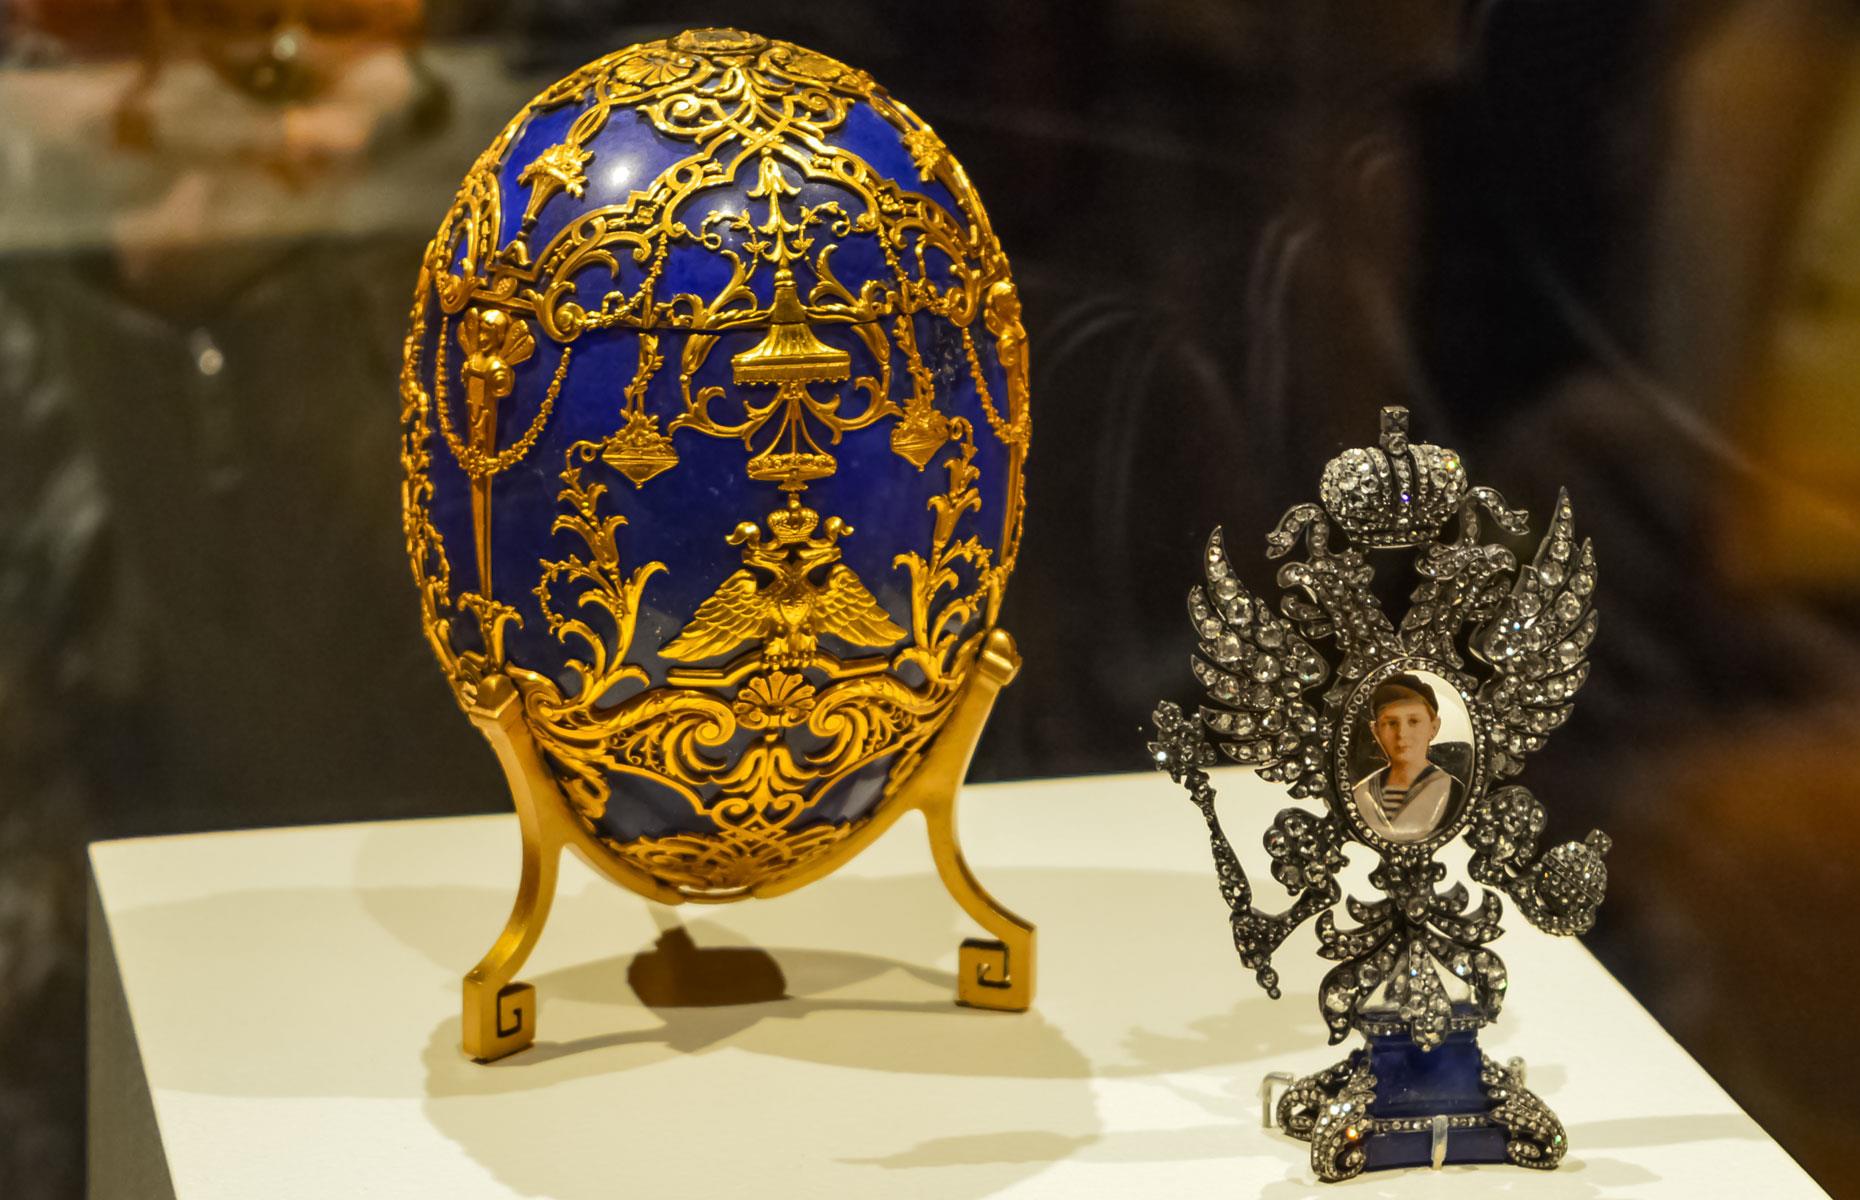 The fascinating history of Peter Carl Fabergé's exquisite creations